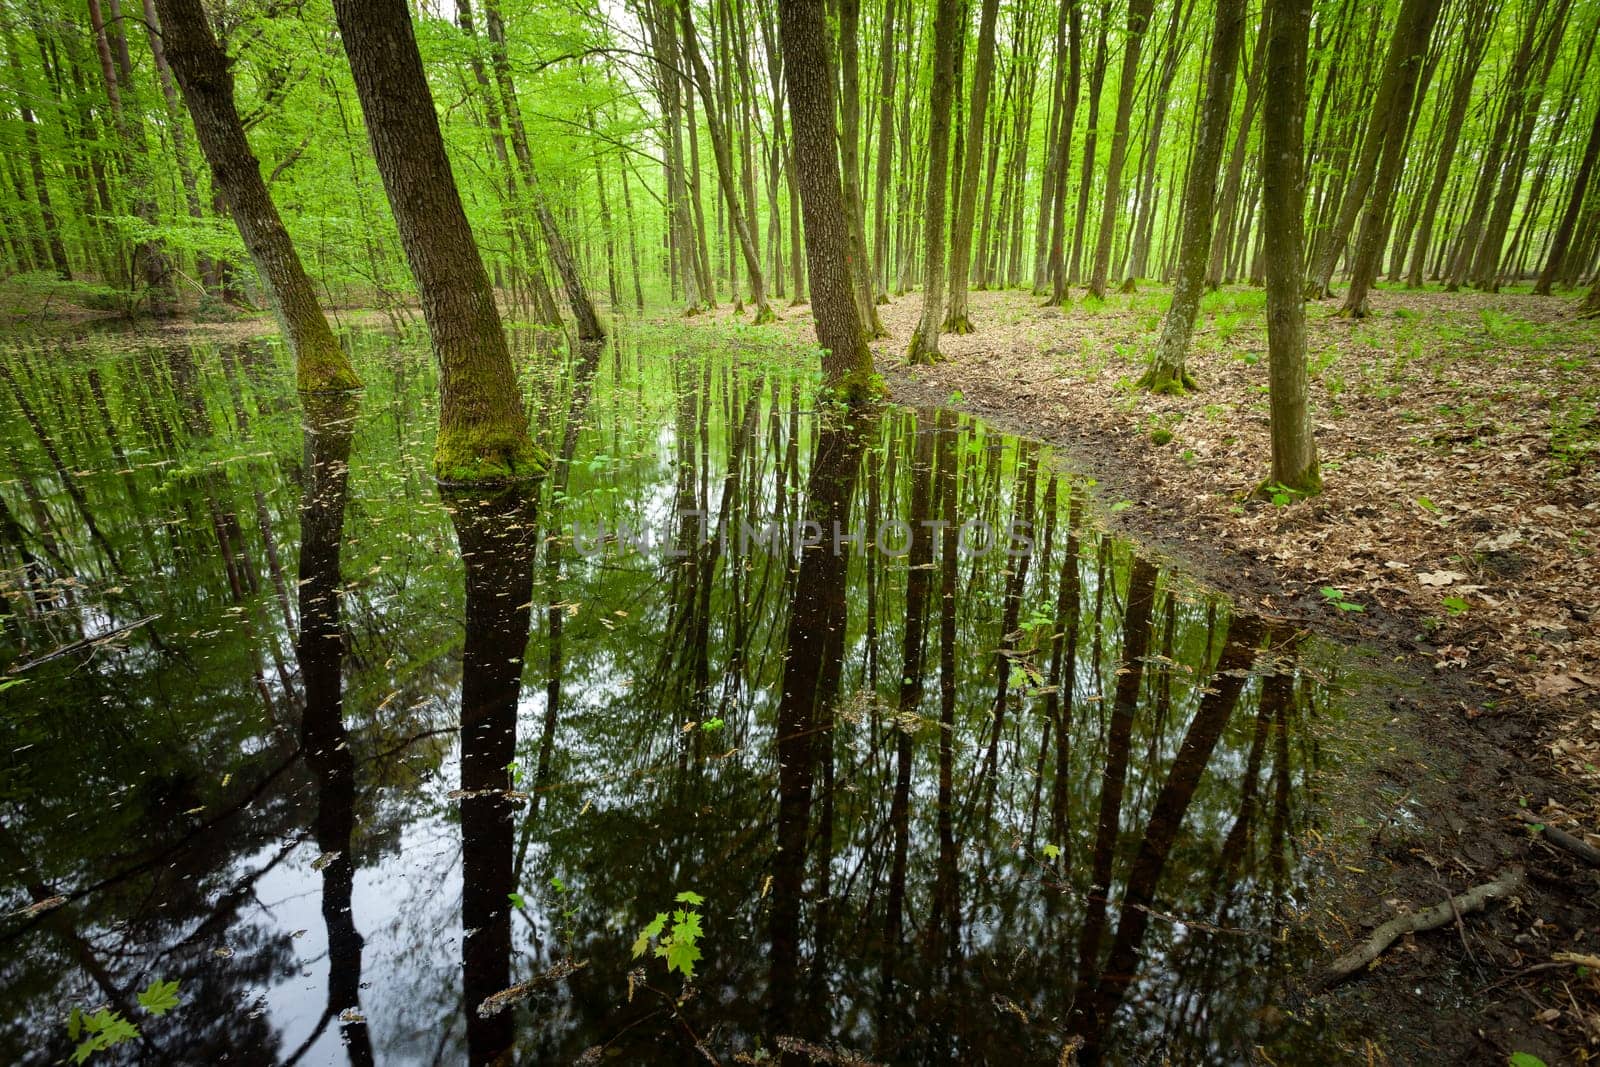 Pond in the spring green forest and the reflection of trees in the water, eastern Poland